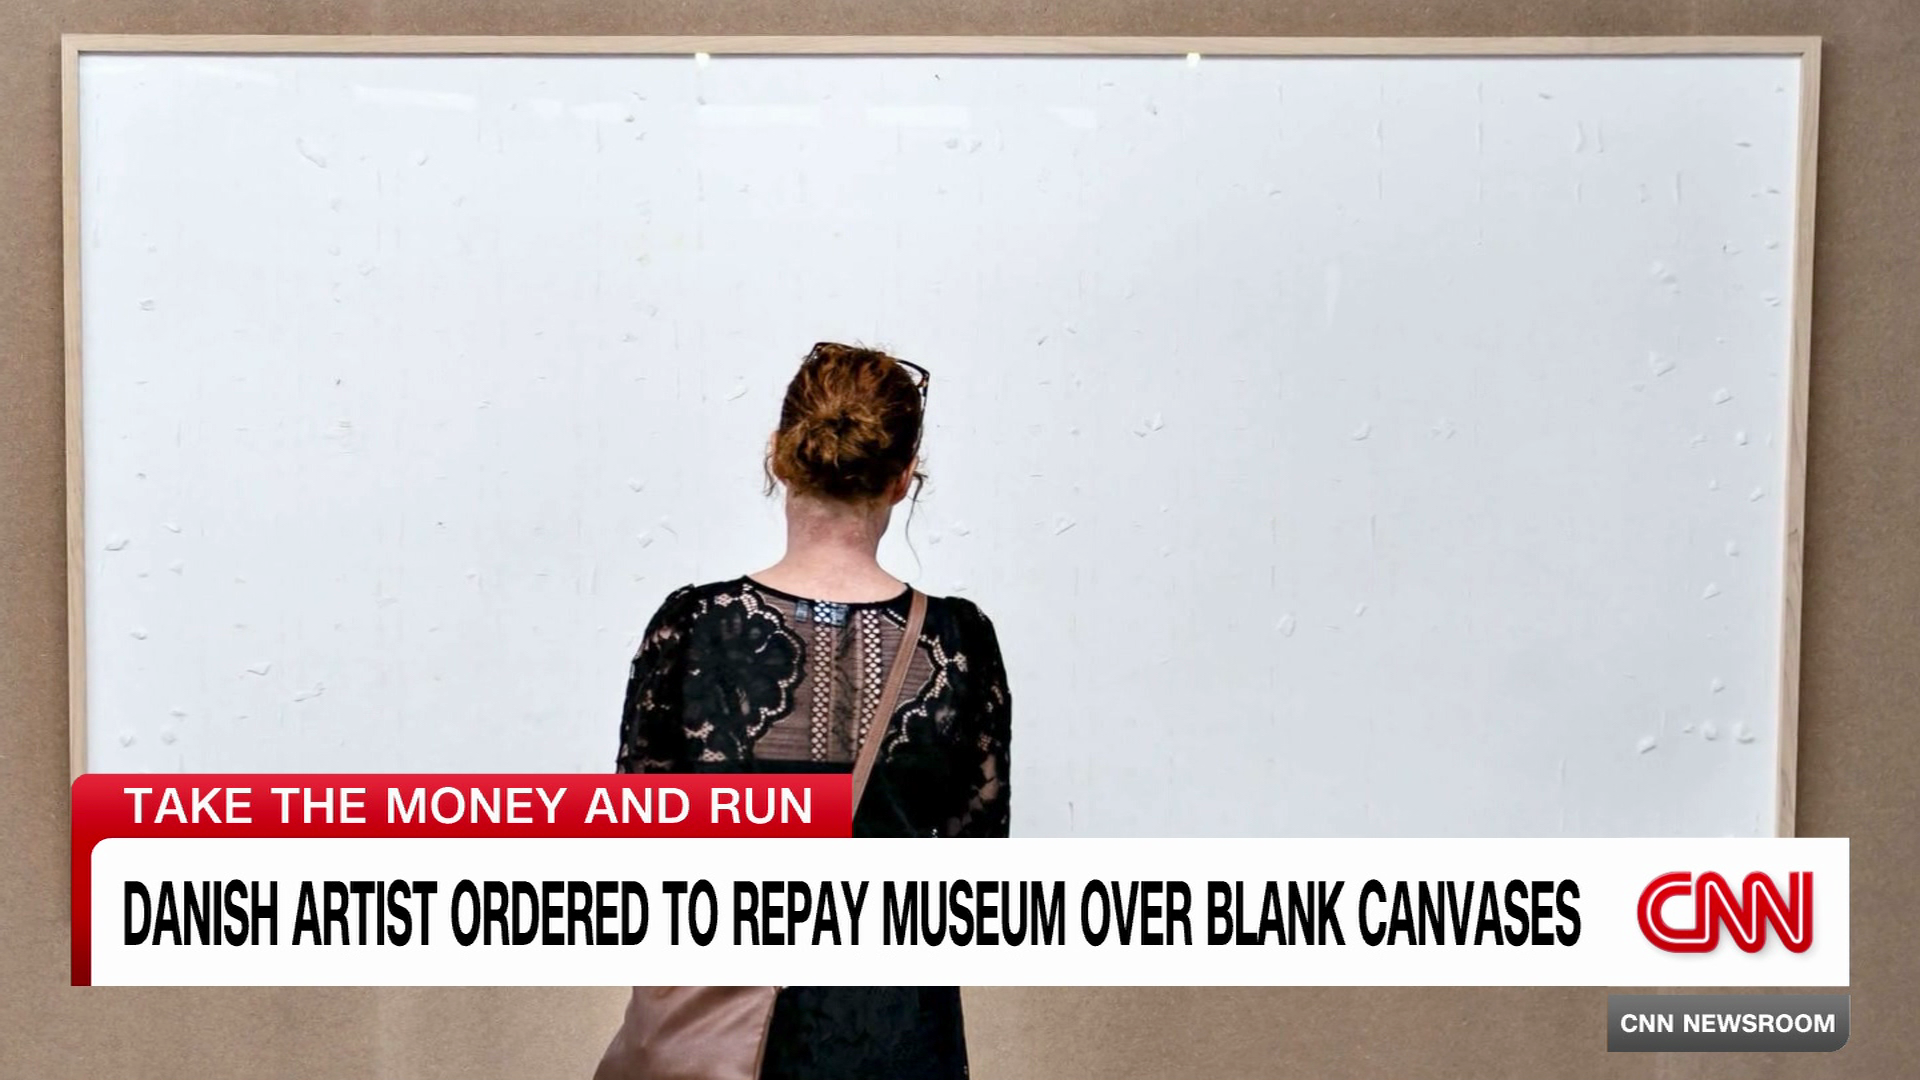 Danish artist ordered to repay museum after delivering blank canvases : NPR